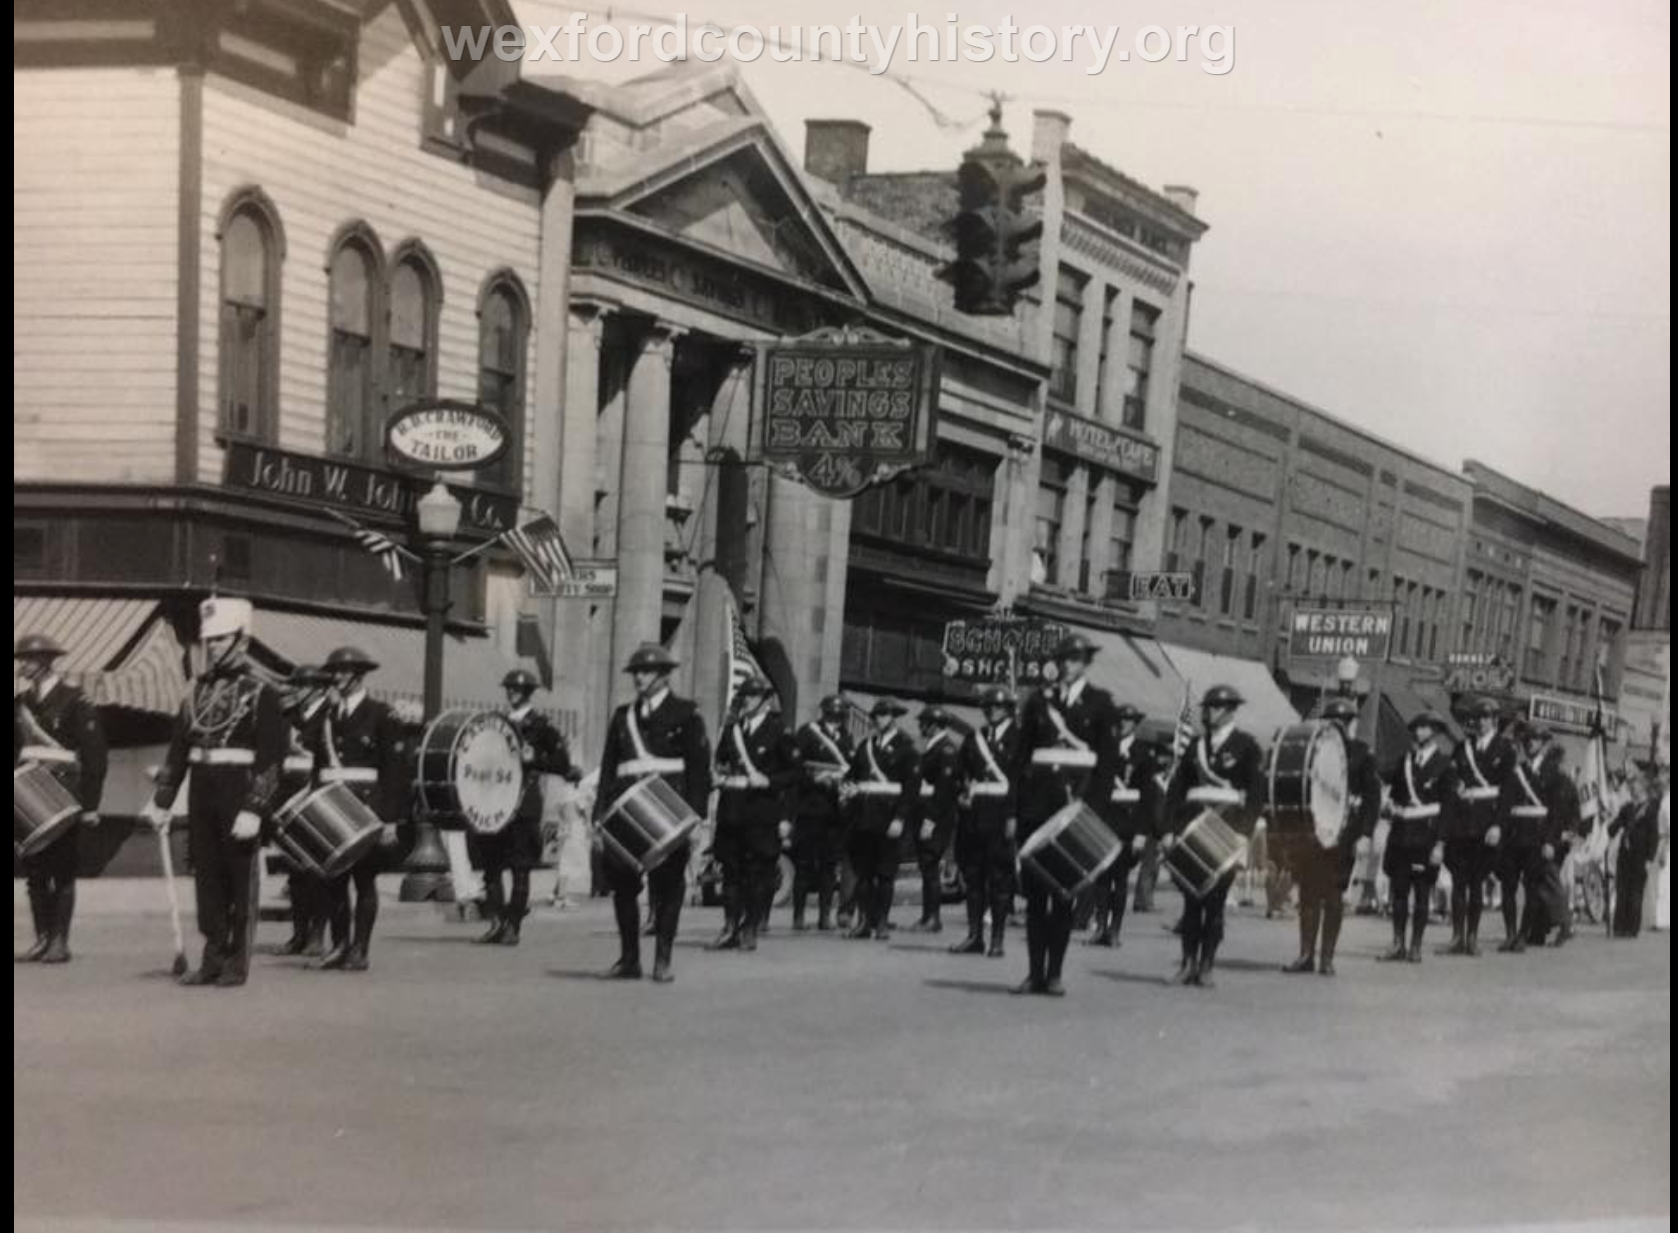 Cadillac-Parade-Unkown-Parade-Passing-By-North-Mitchell-Street-100-Block-West-Side-1